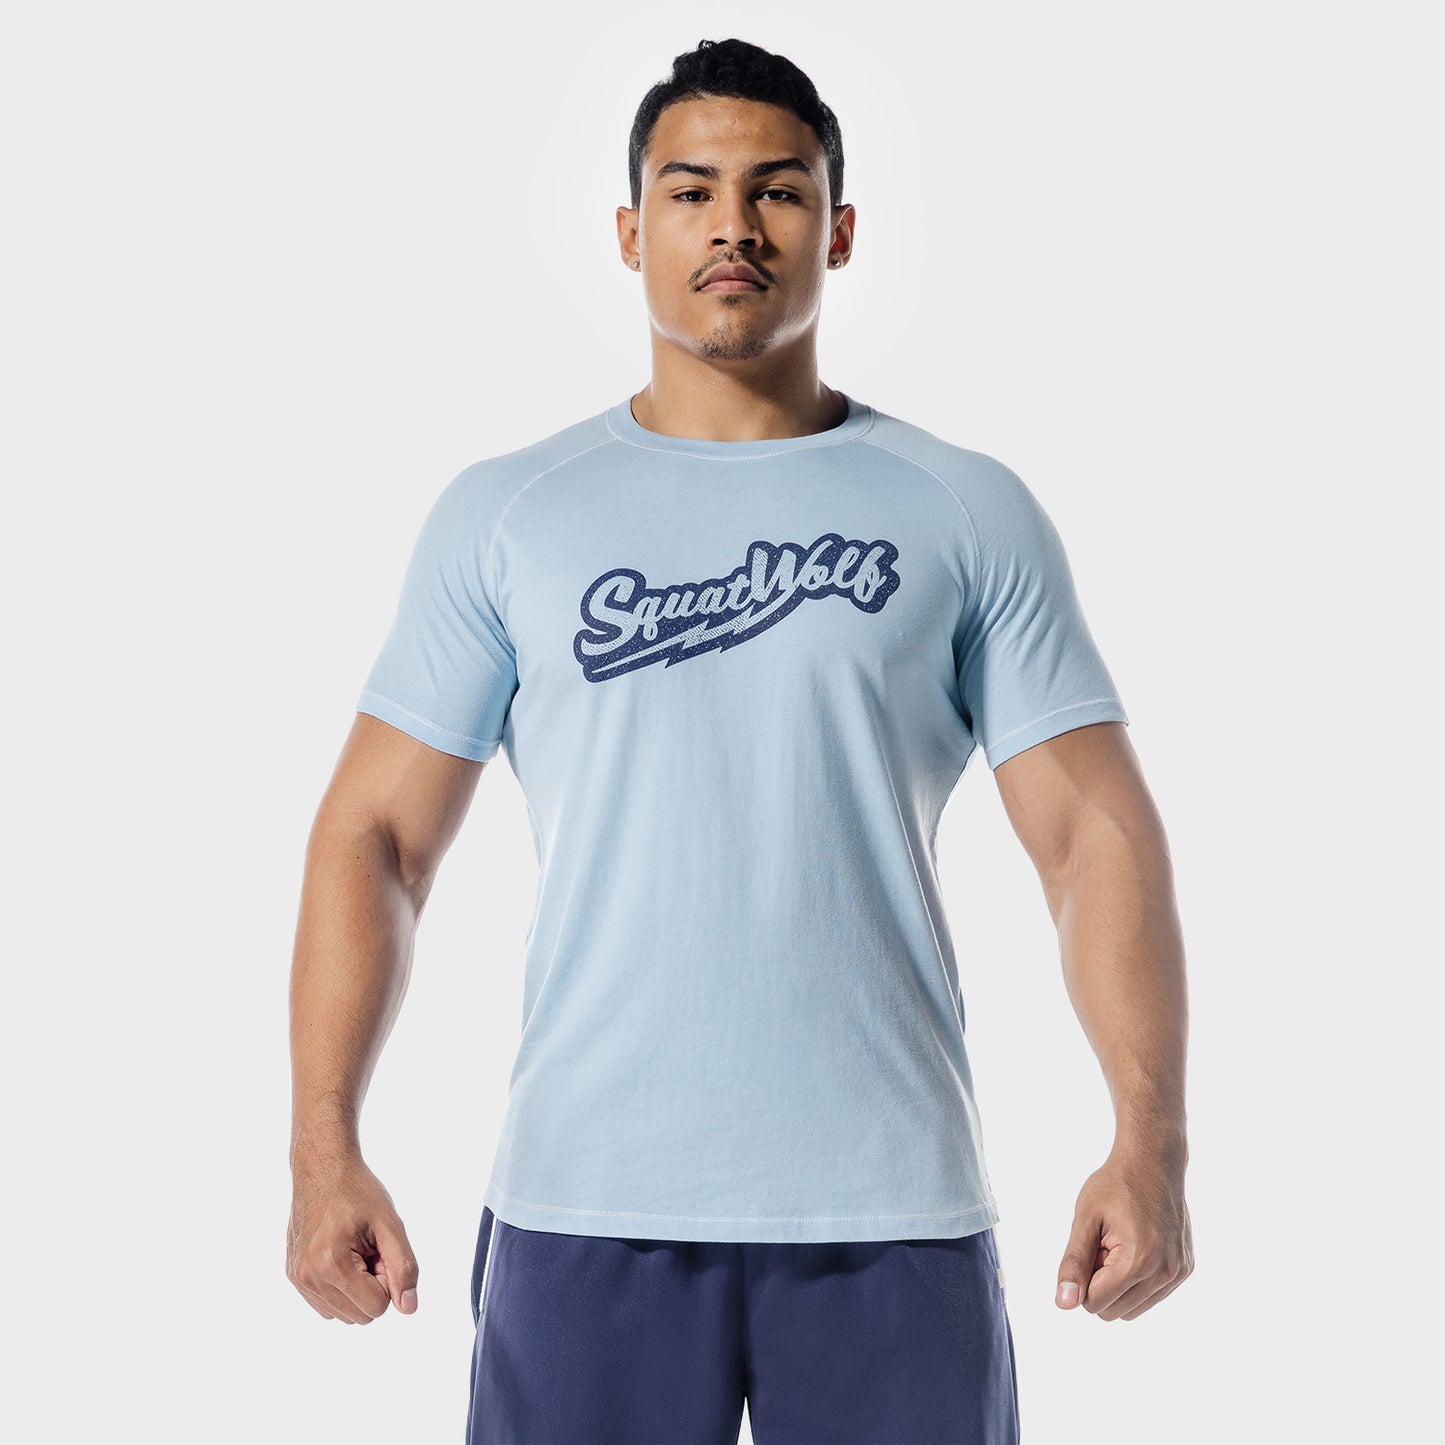 squatwolf-gym-t-shirts-golden-era-one-up-t-shirt-bluebell-workout-clothes-for-men